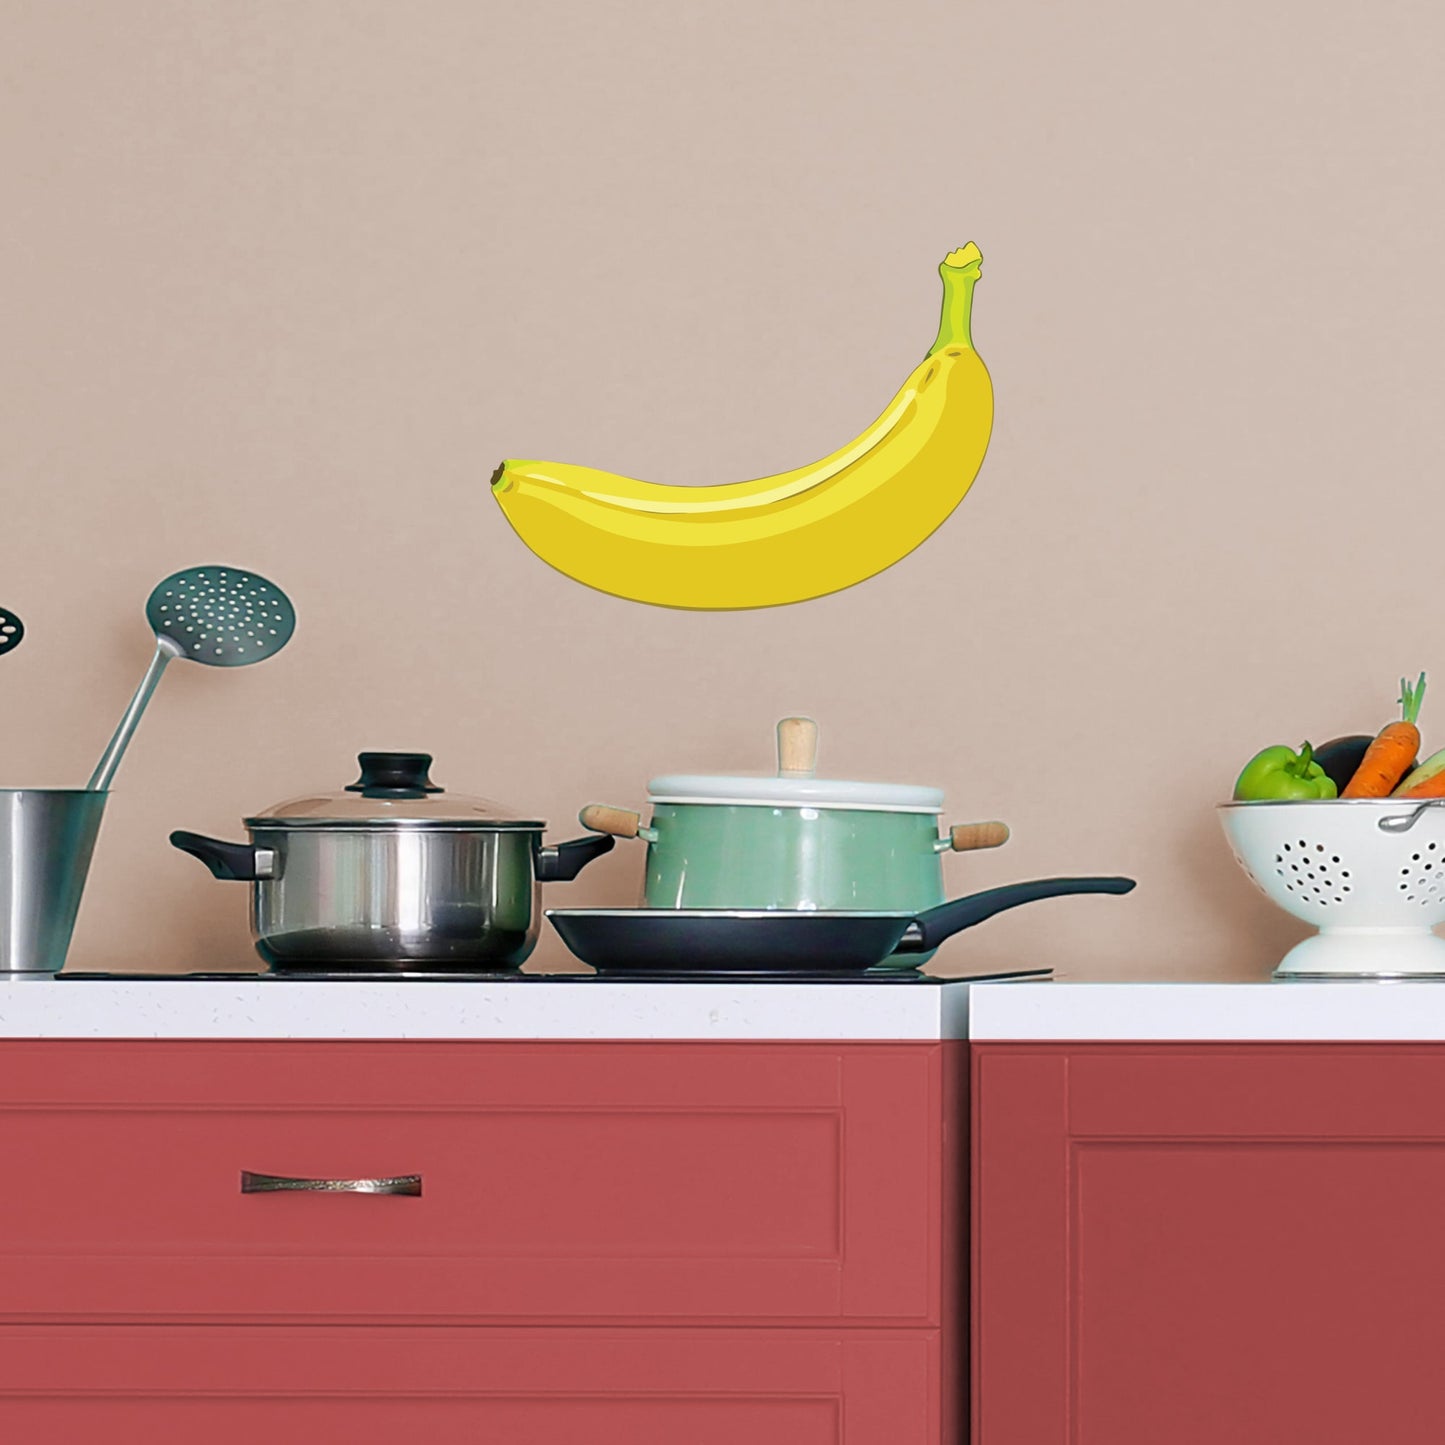 Large Banana + 2 Decals (15"W x 11"H)